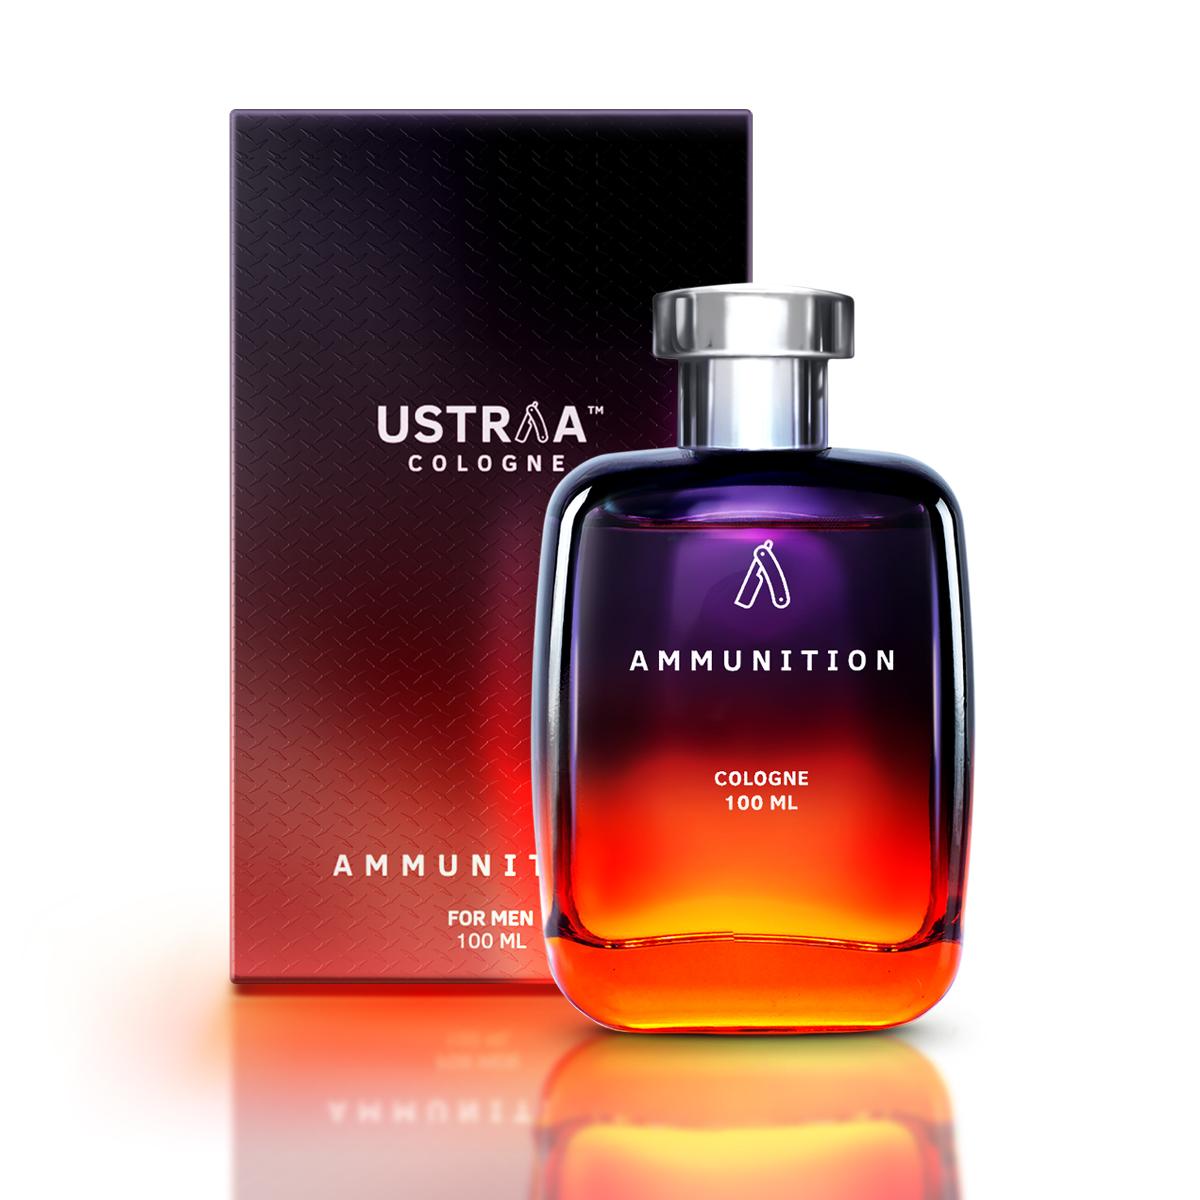 Ustraa Ammunition Cologne - Deep, Mysterious and Intense Fragrance that last long into the Night - No Gas - Perfume for Men - 100 ml 